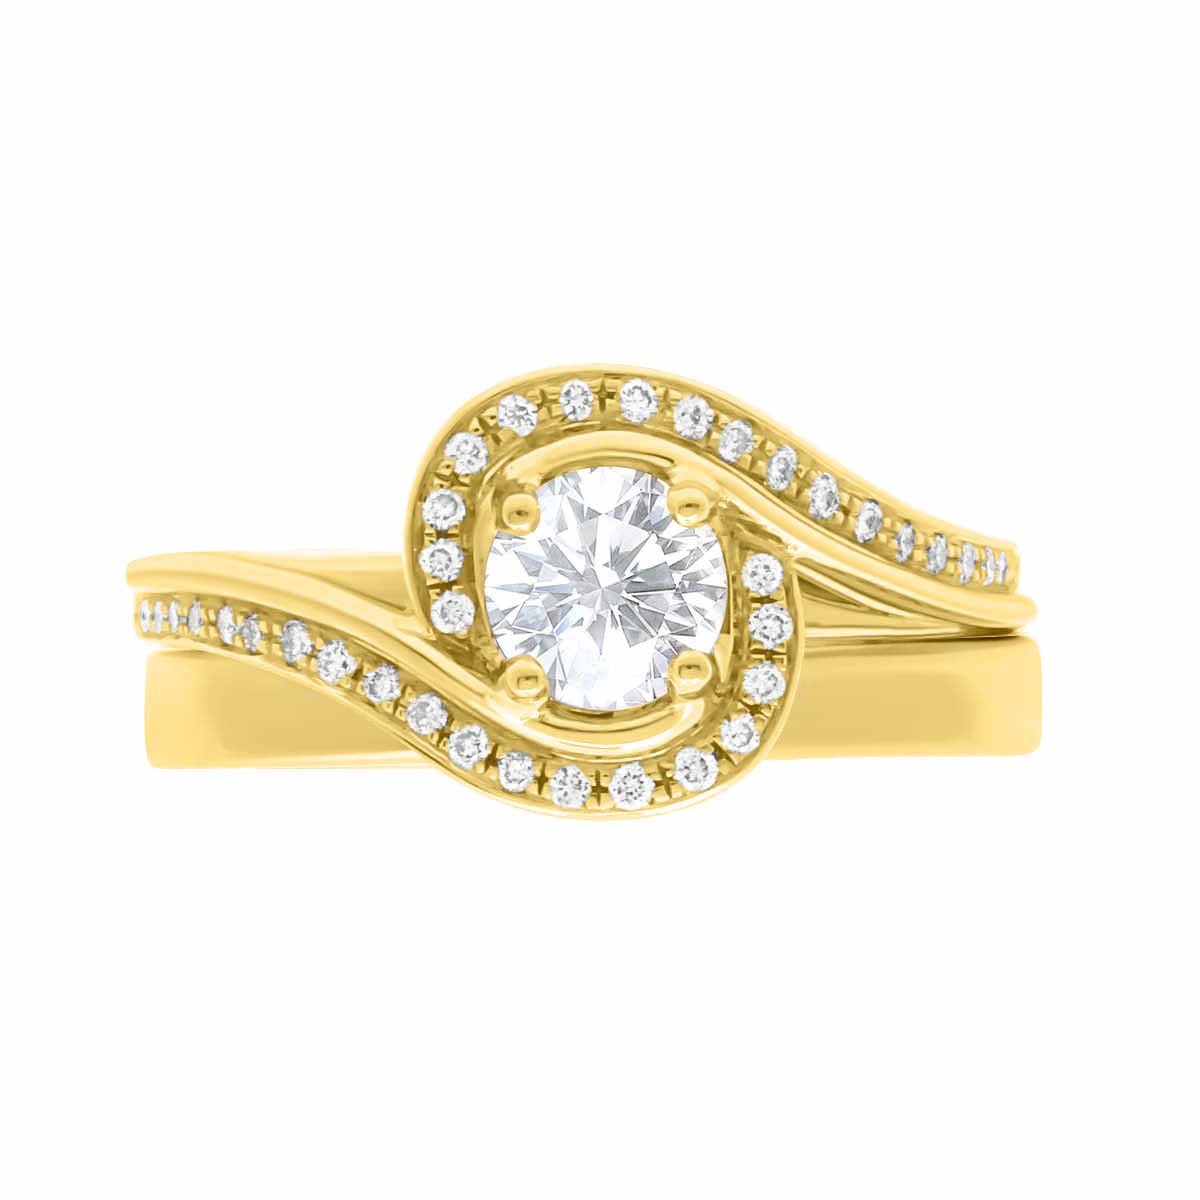 Contemporary Style Engagement Ring in yellow gold, lying flat, with a matching plain wedding ring, with a white background